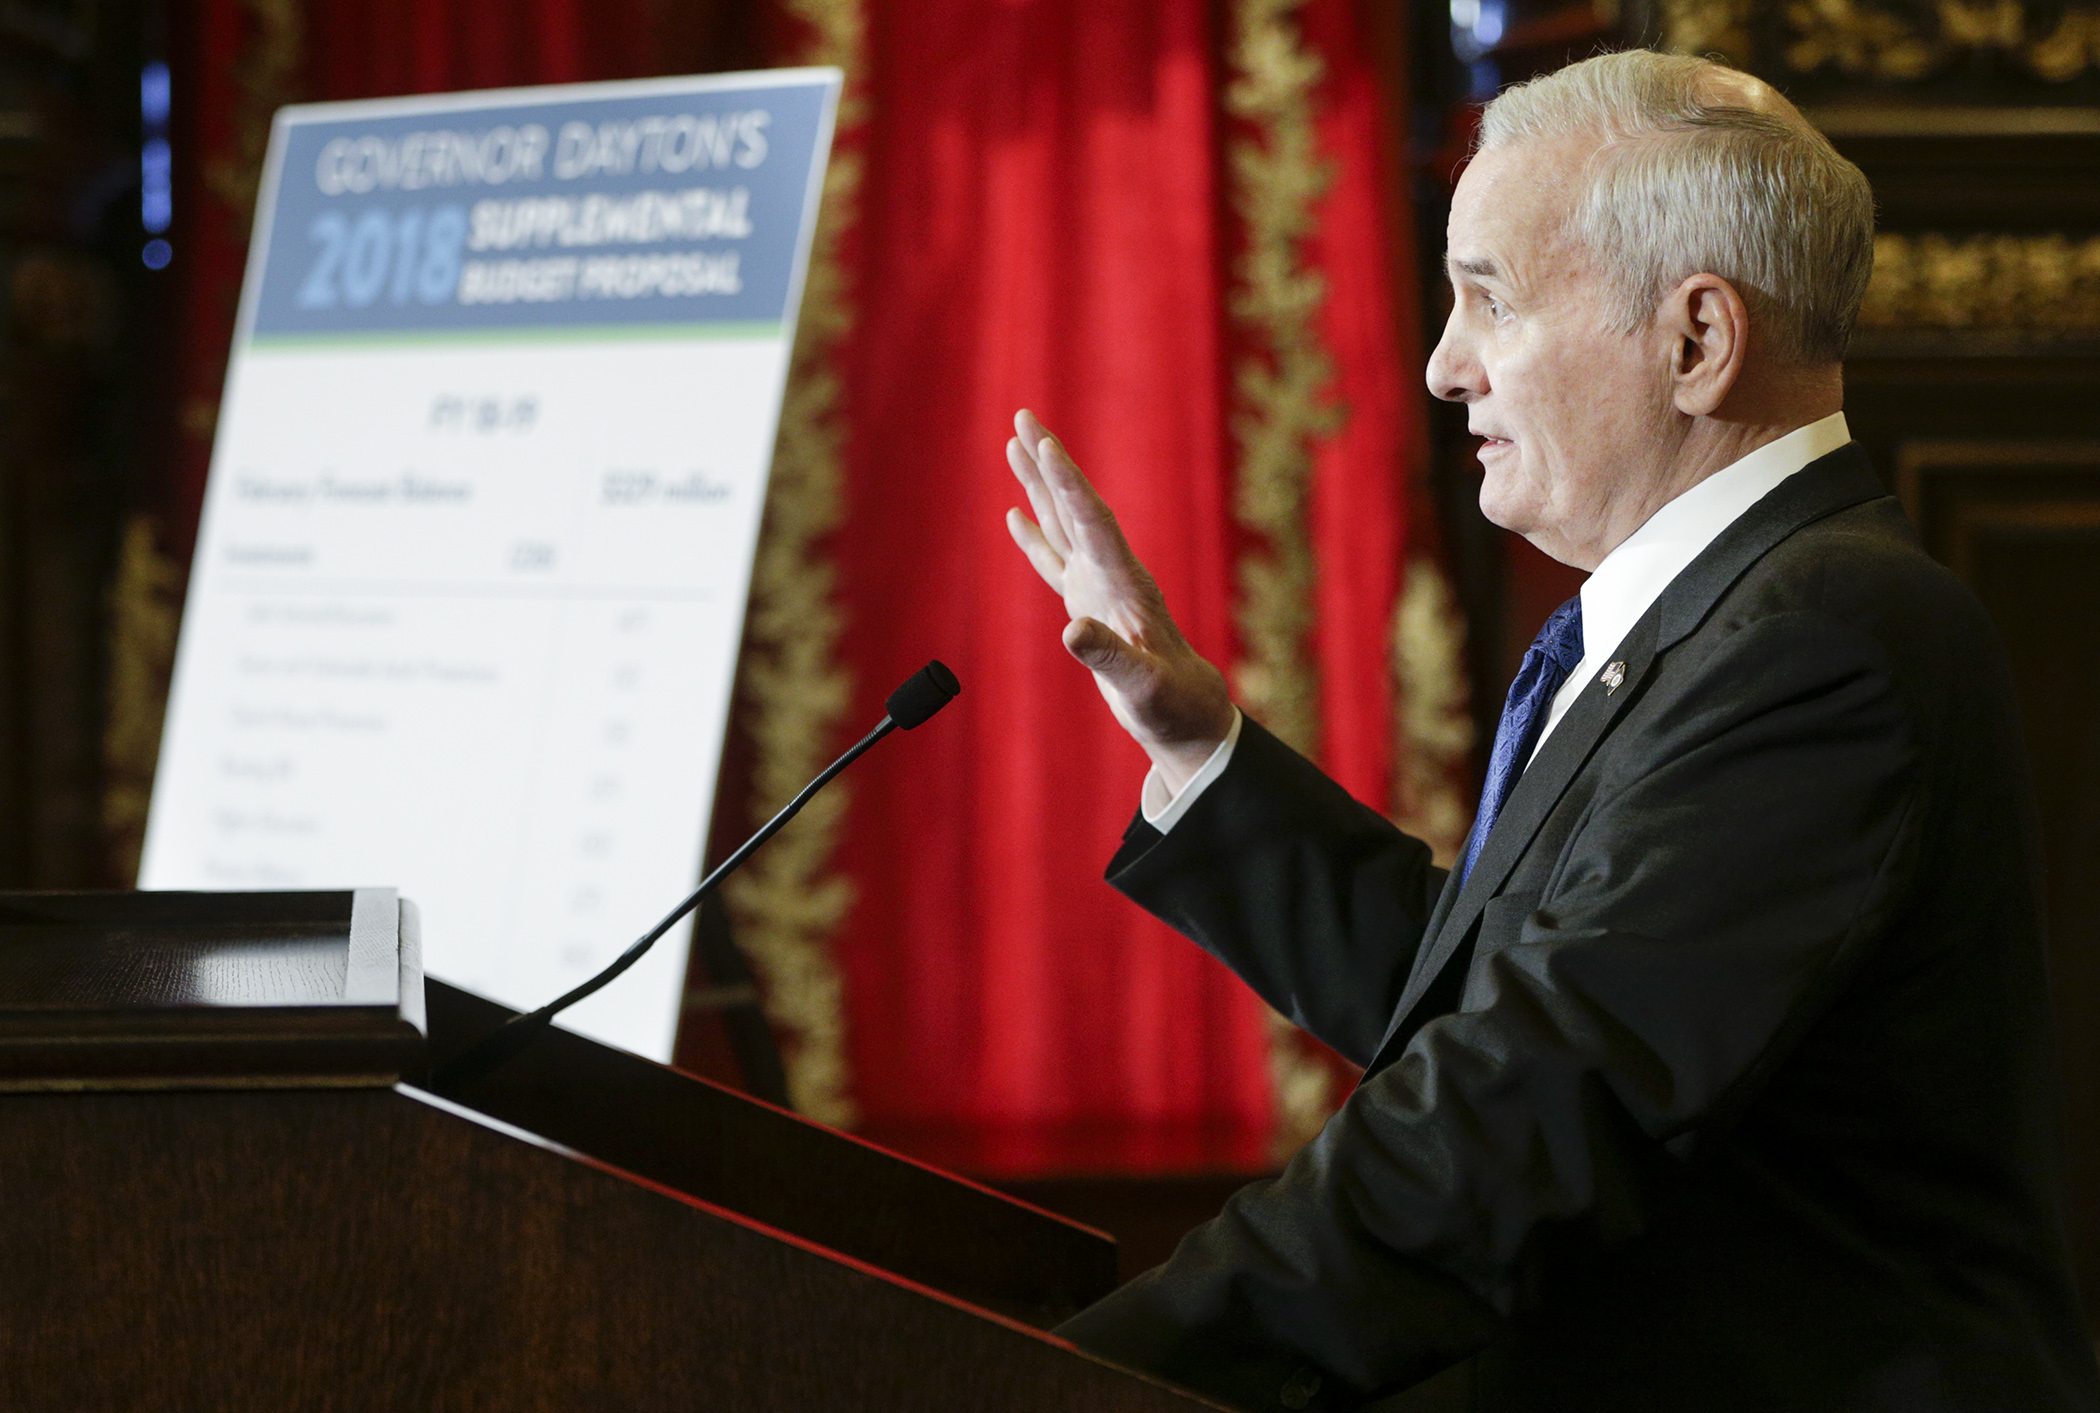 Gov. Mark Dayton answers questions from the media after releasing his supplemental budget plan at a Friday news conference. Photo by Paul Battaglia